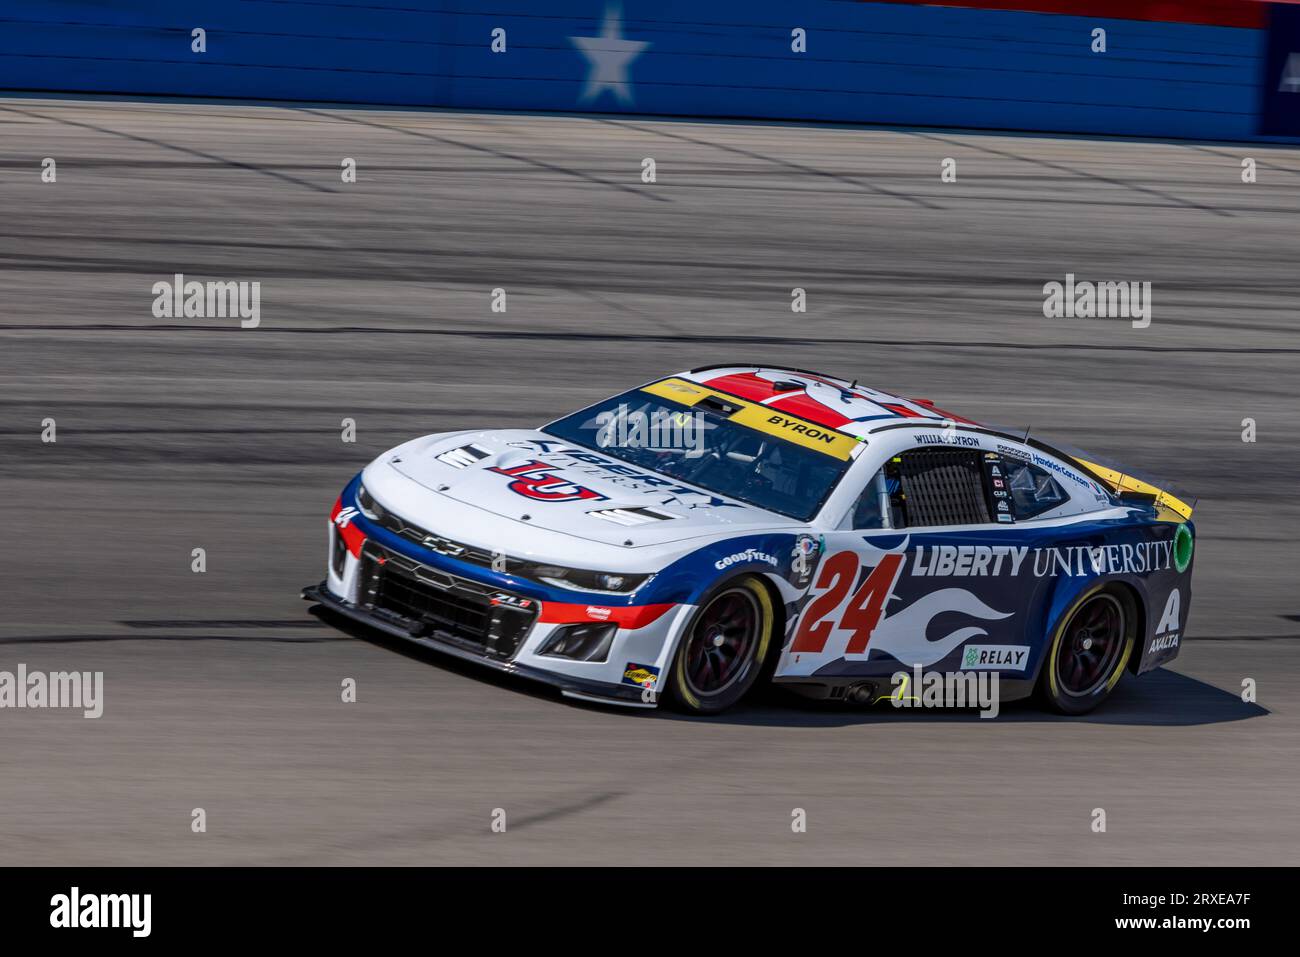 Fort Worth, Texas - September 24rd, 2023: William Byron, driver of the #24 Liberty University Chevrolet, competing in the NASCAR Autotrader EchoPark Automotive 400 at Texas Motor Speedway. Credit: Nick Paruch/Alamy Live News Stock Photo